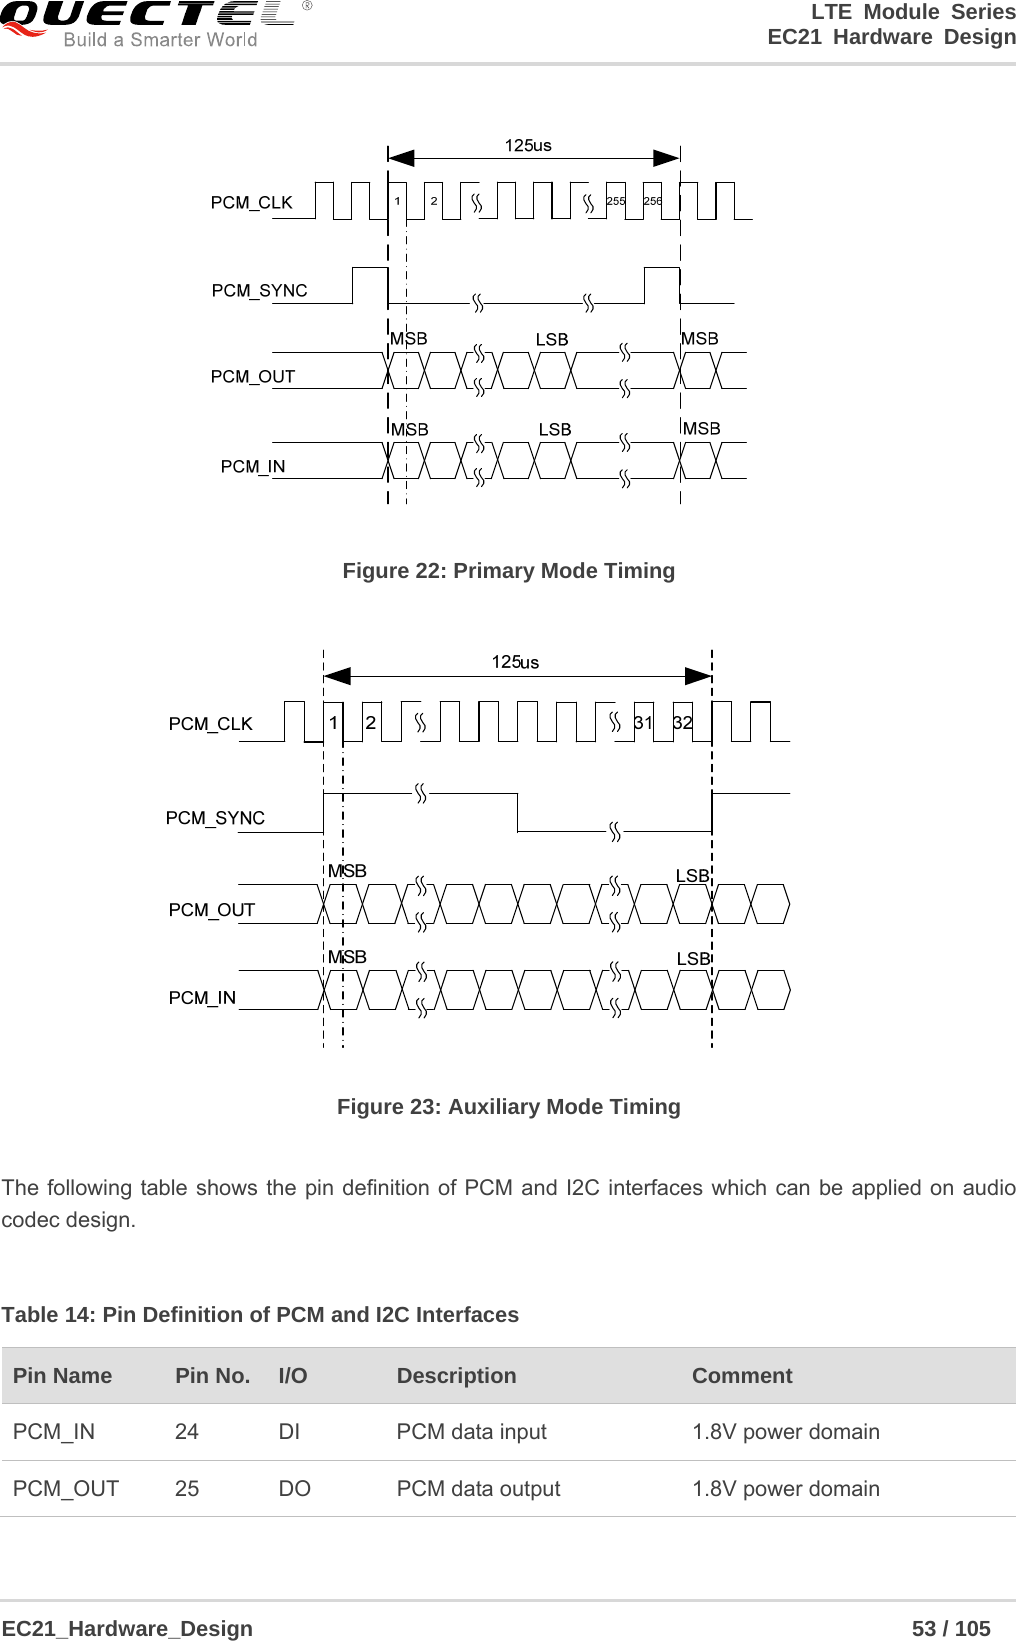                                                                        LTE Module Series                                                                 EC21 Hardware Design  EC21_Hardware_Design                                                            53 / 105     Figure 22: Primary Mode Timing  Figure 23: Auxiliary Mode Timing  The following table shows the pin definition of PCM and I2C interfaces which can be applied on audio codec design.  Table 14: Pin Definition of PCM and I2C Interfaces Pin Name    Pin No.  I/O  Description   Comment PCM_IN  24  DI  PCM data input  1.8V power domain PCM_OUT  25  DO  PCM data output  1.8V power domain 